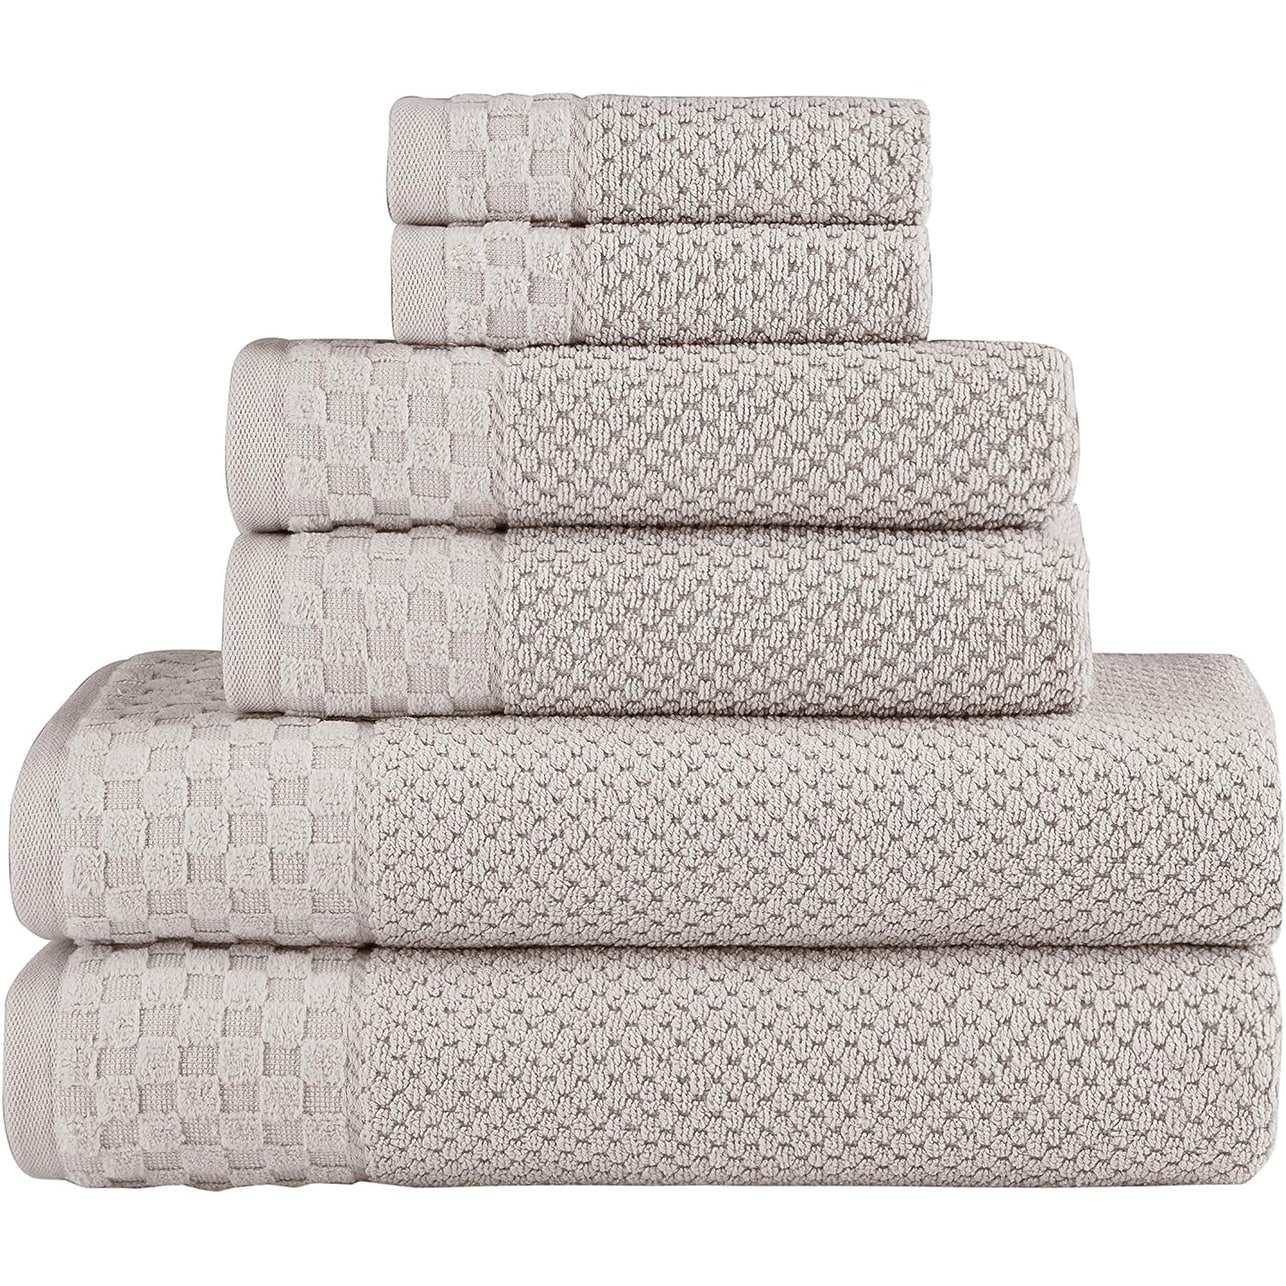 https://ak1.ostkcdn.com/images/products/is/images/direct/82af8b72f8e317f275e2394fd9fdfa2c42d7366f/Boston-Towel-Collection-Turkish-Cotton-Luxury-and-Soft-2-Large-Bath-Towels%2C-2-Washcloths-and-2-Hand-Towels-%28Set-of-6%29.jpg